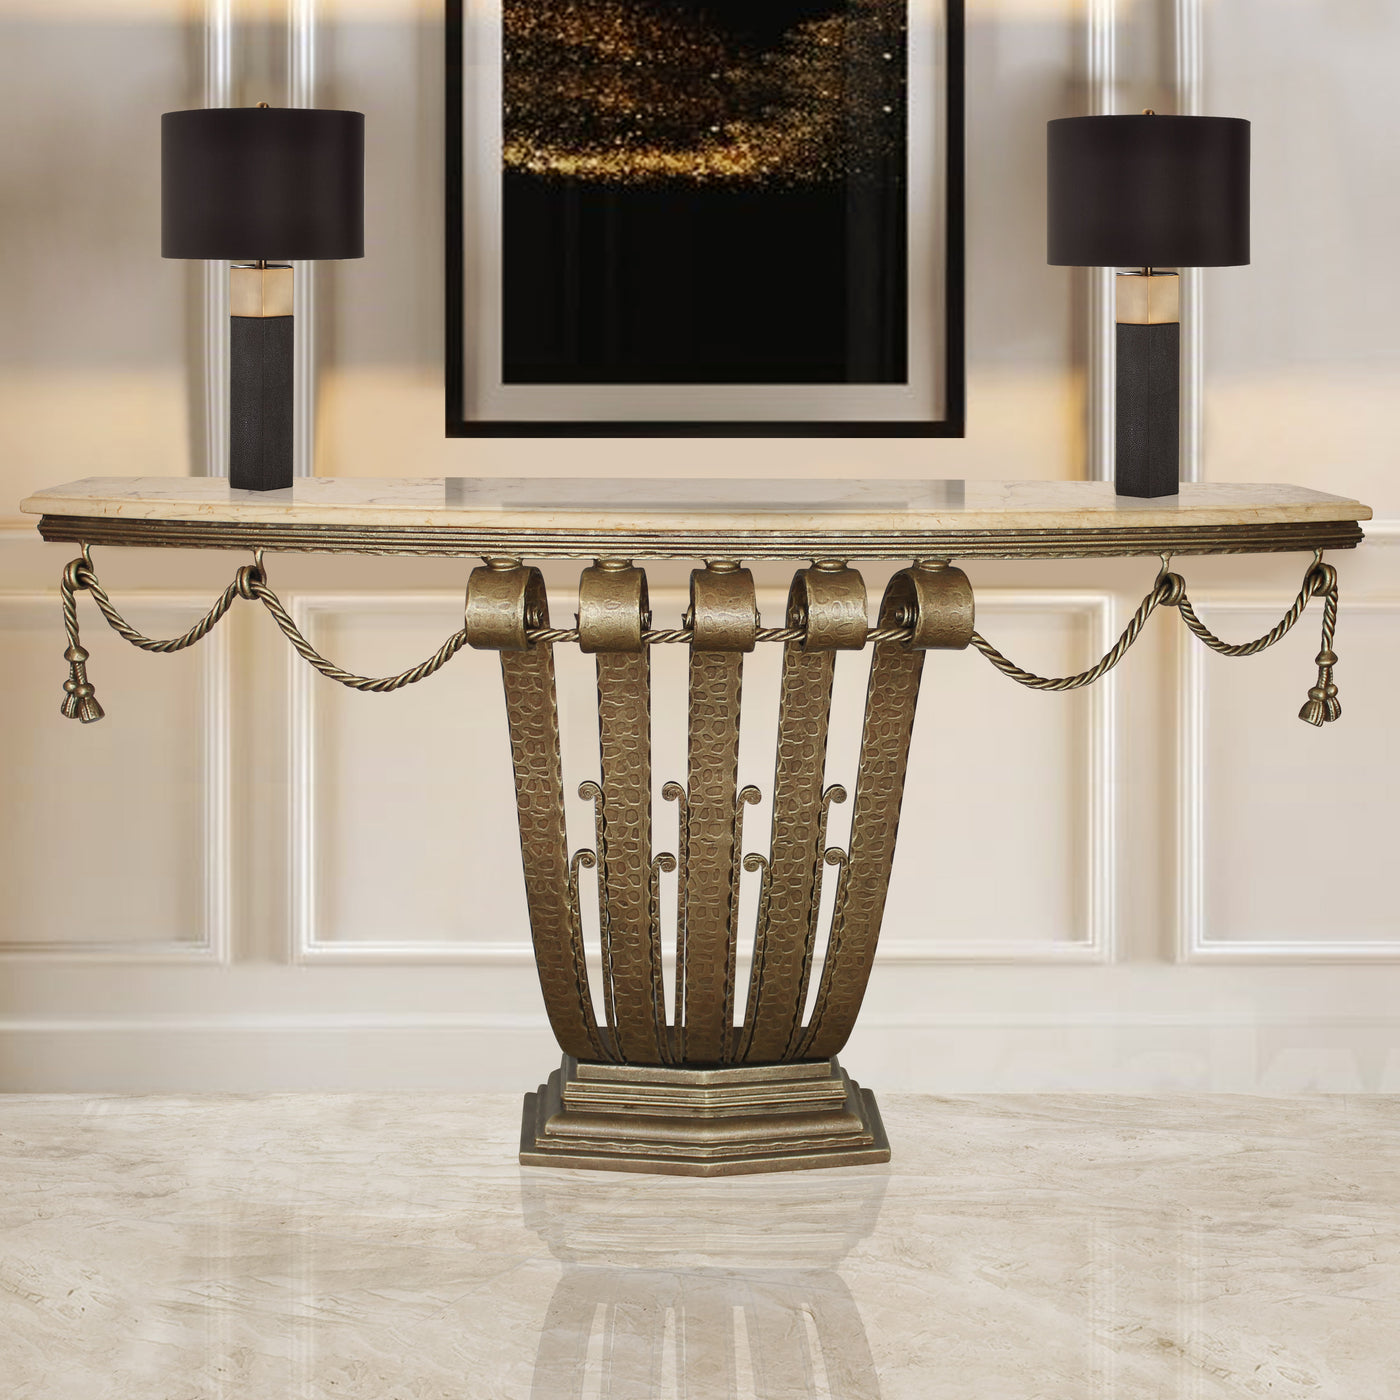 An Art Deco styled wrought iron console table painted in an antique bronze finish in a luxurious living space